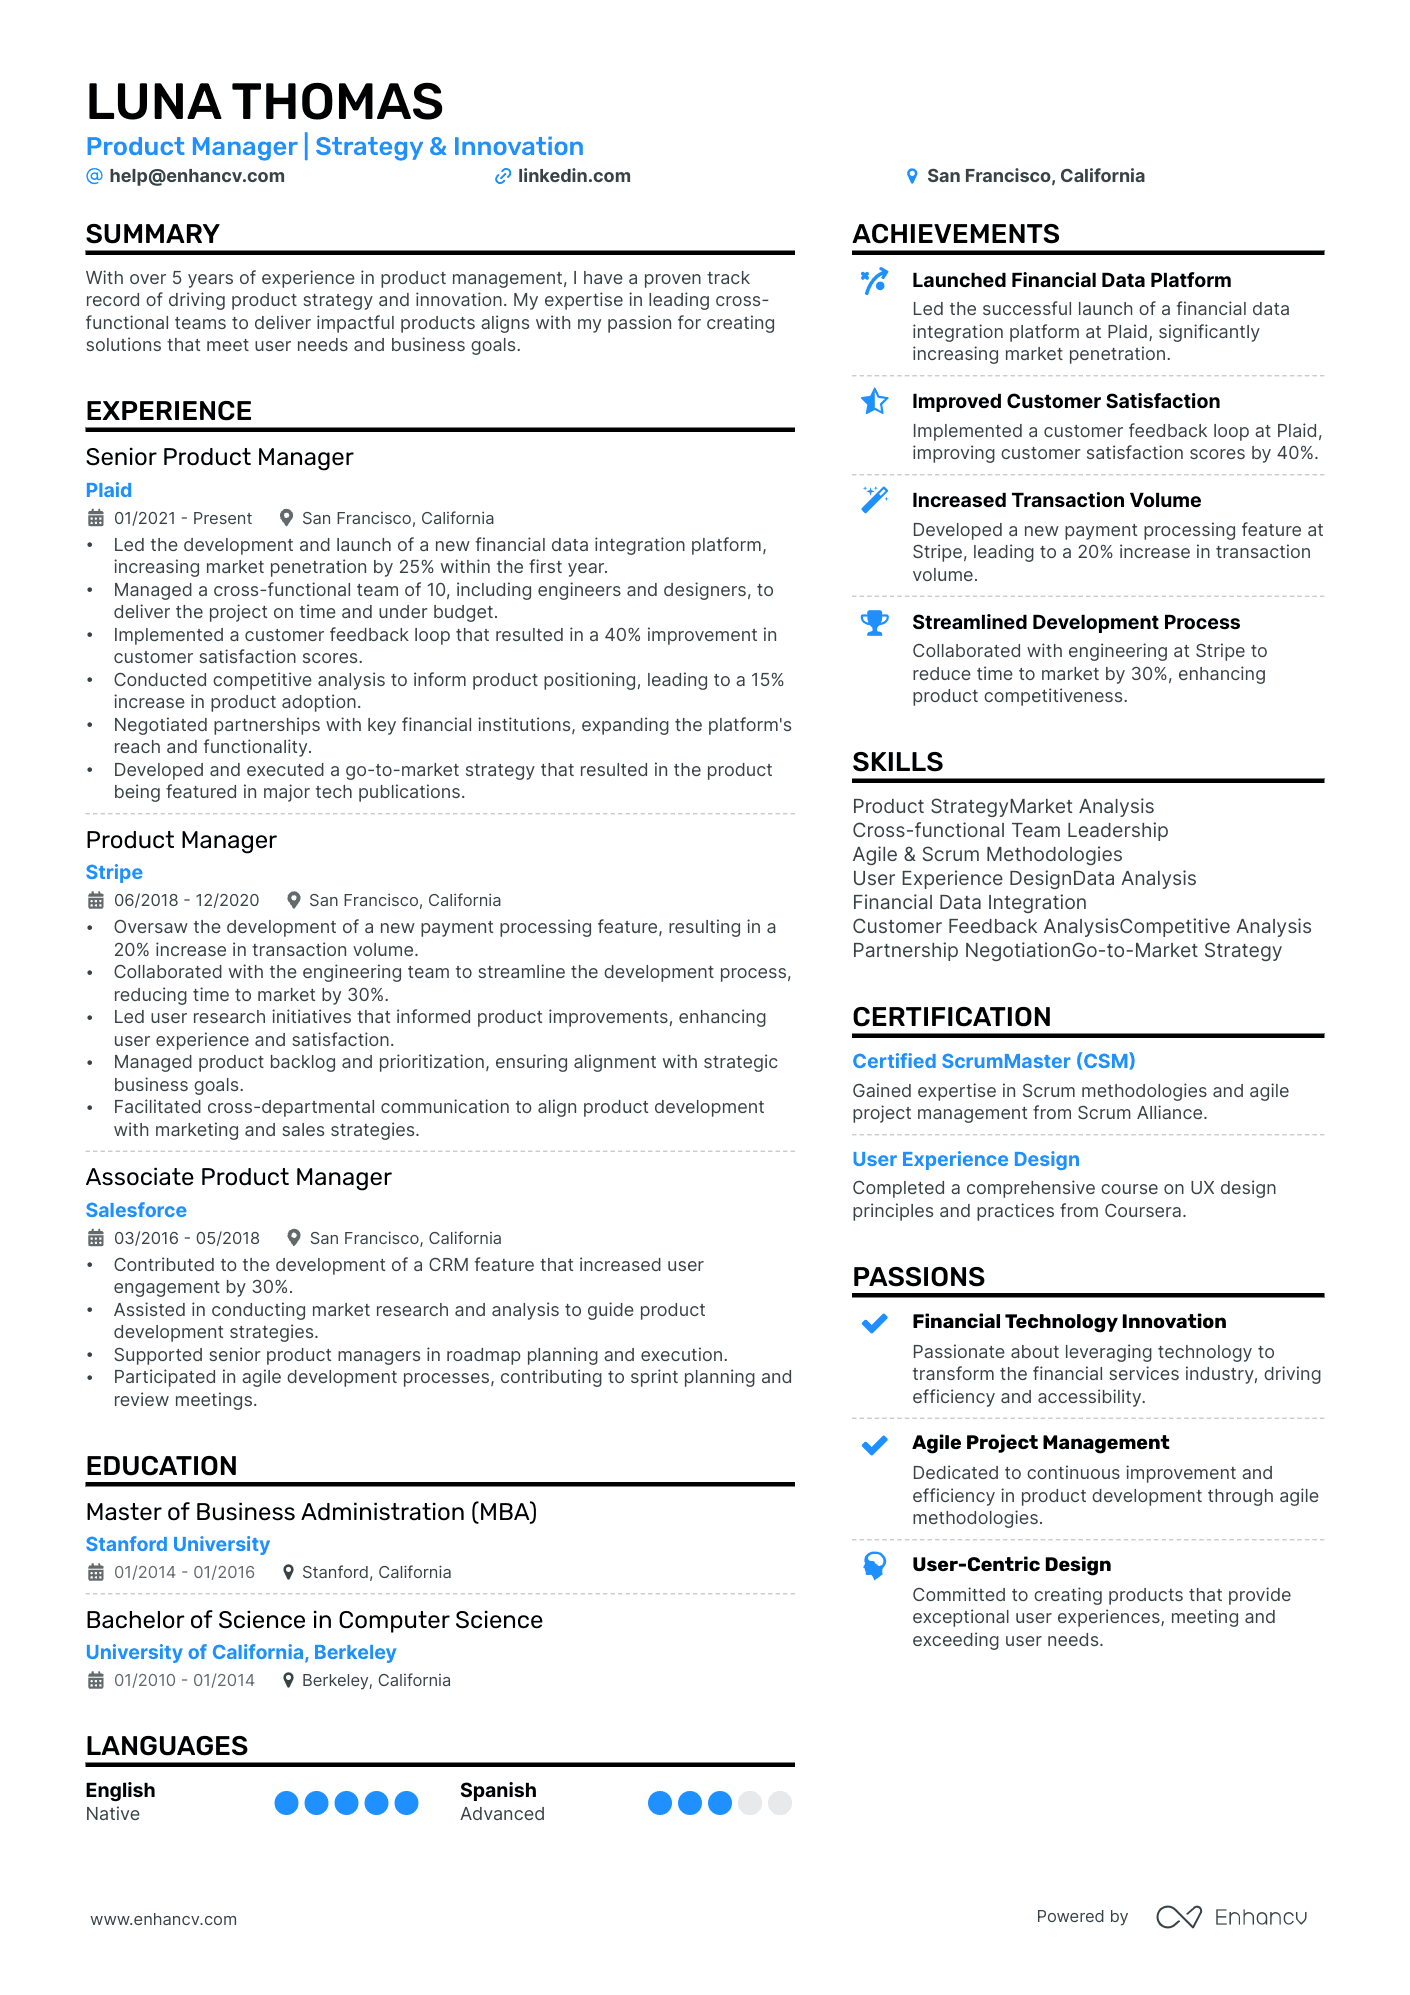 Product Manager | Strategy & Innovation resume example